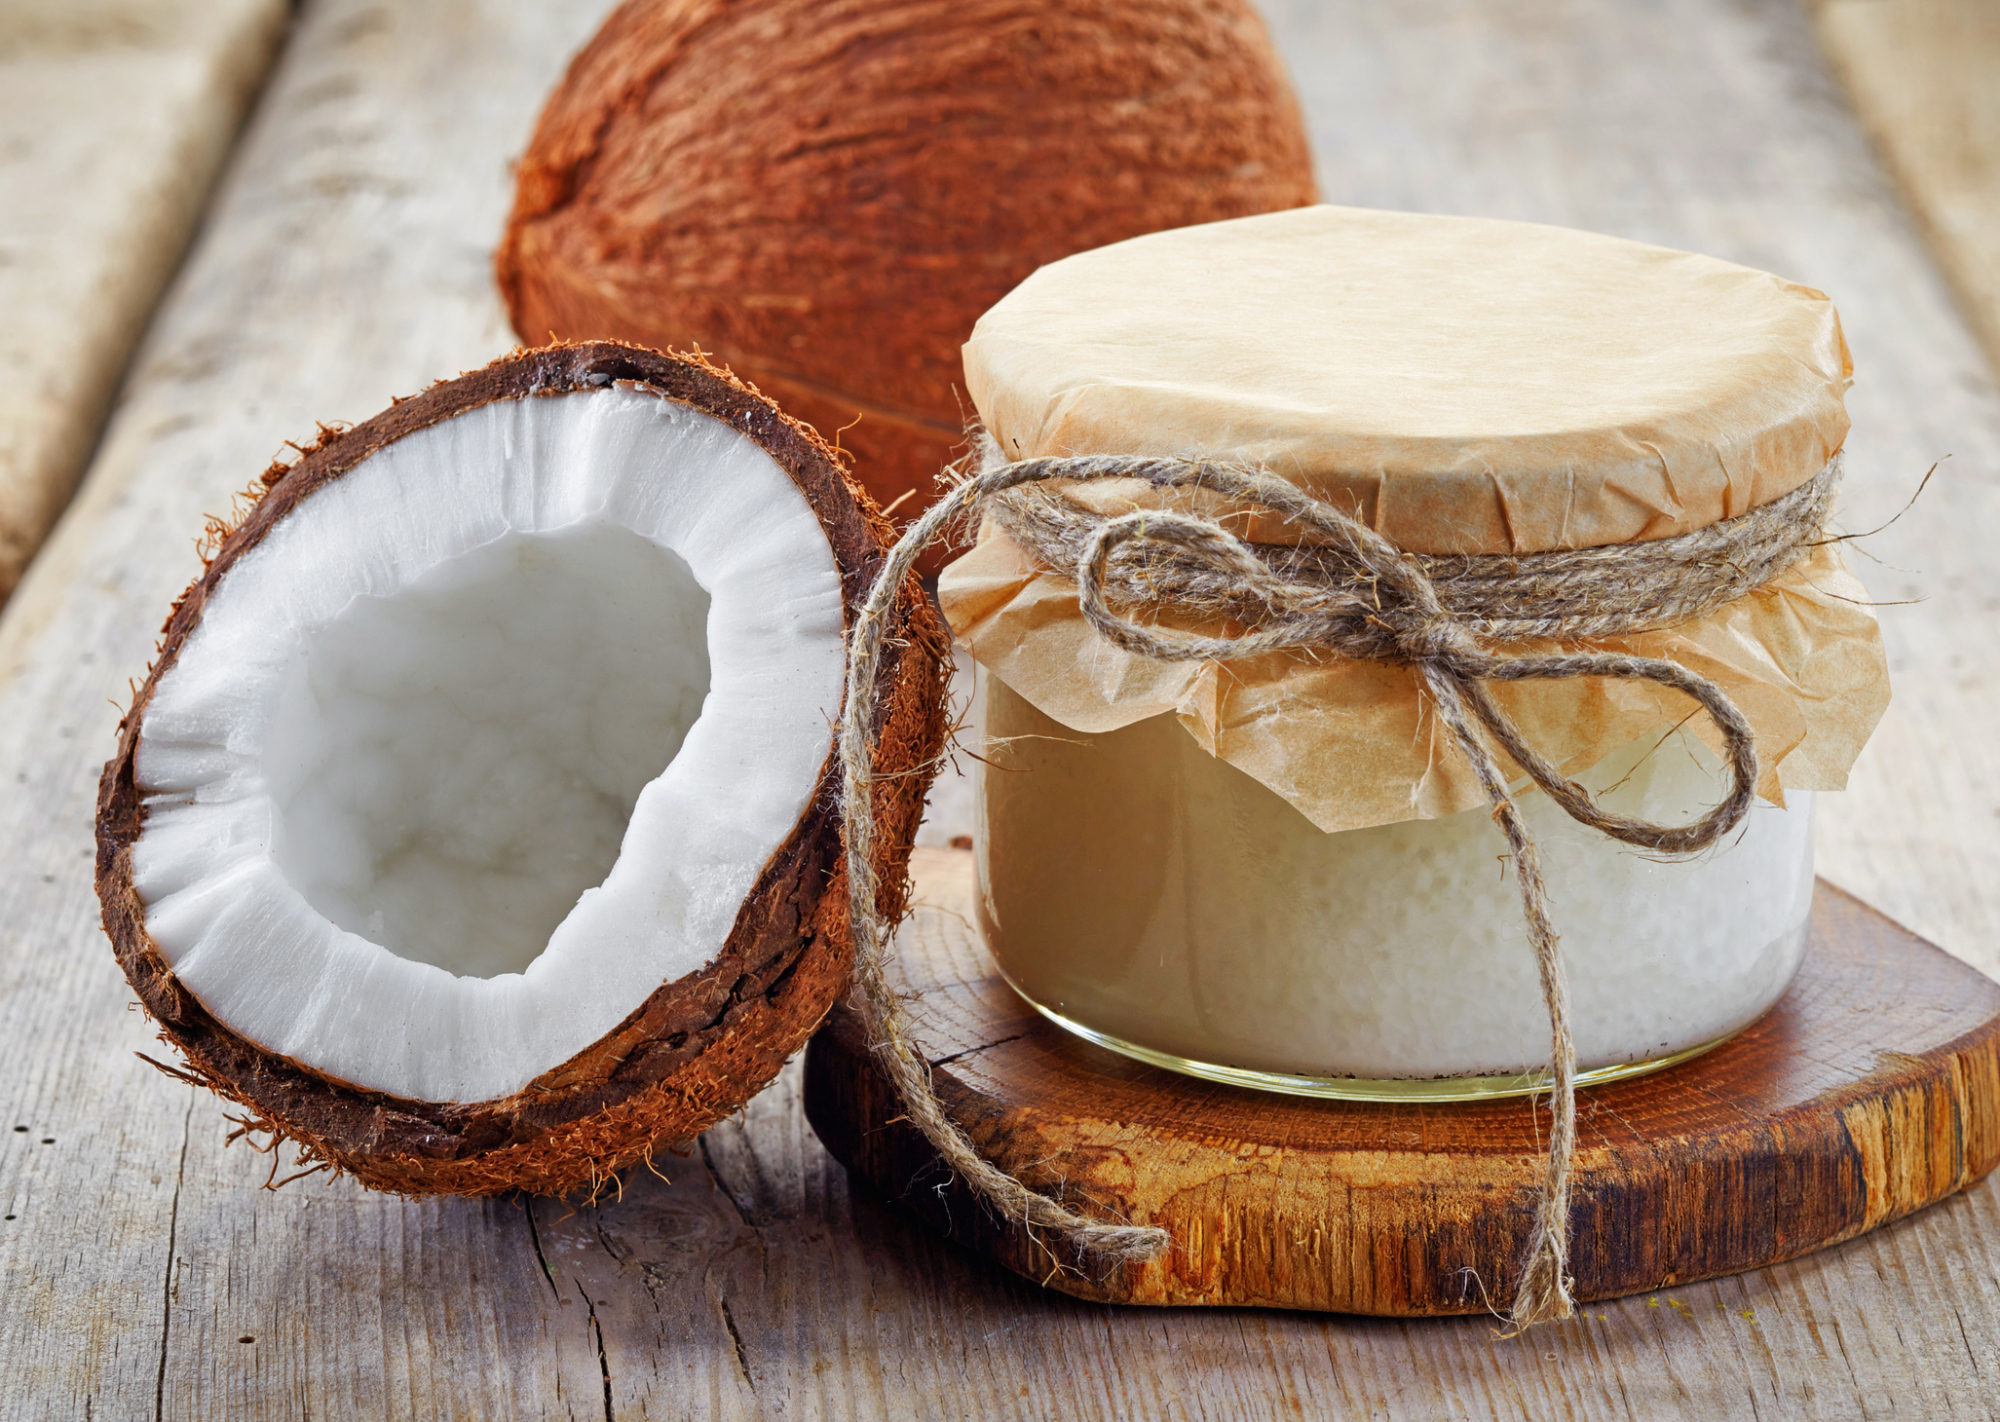 Surprising Benefits & Uses of Coconut Oil